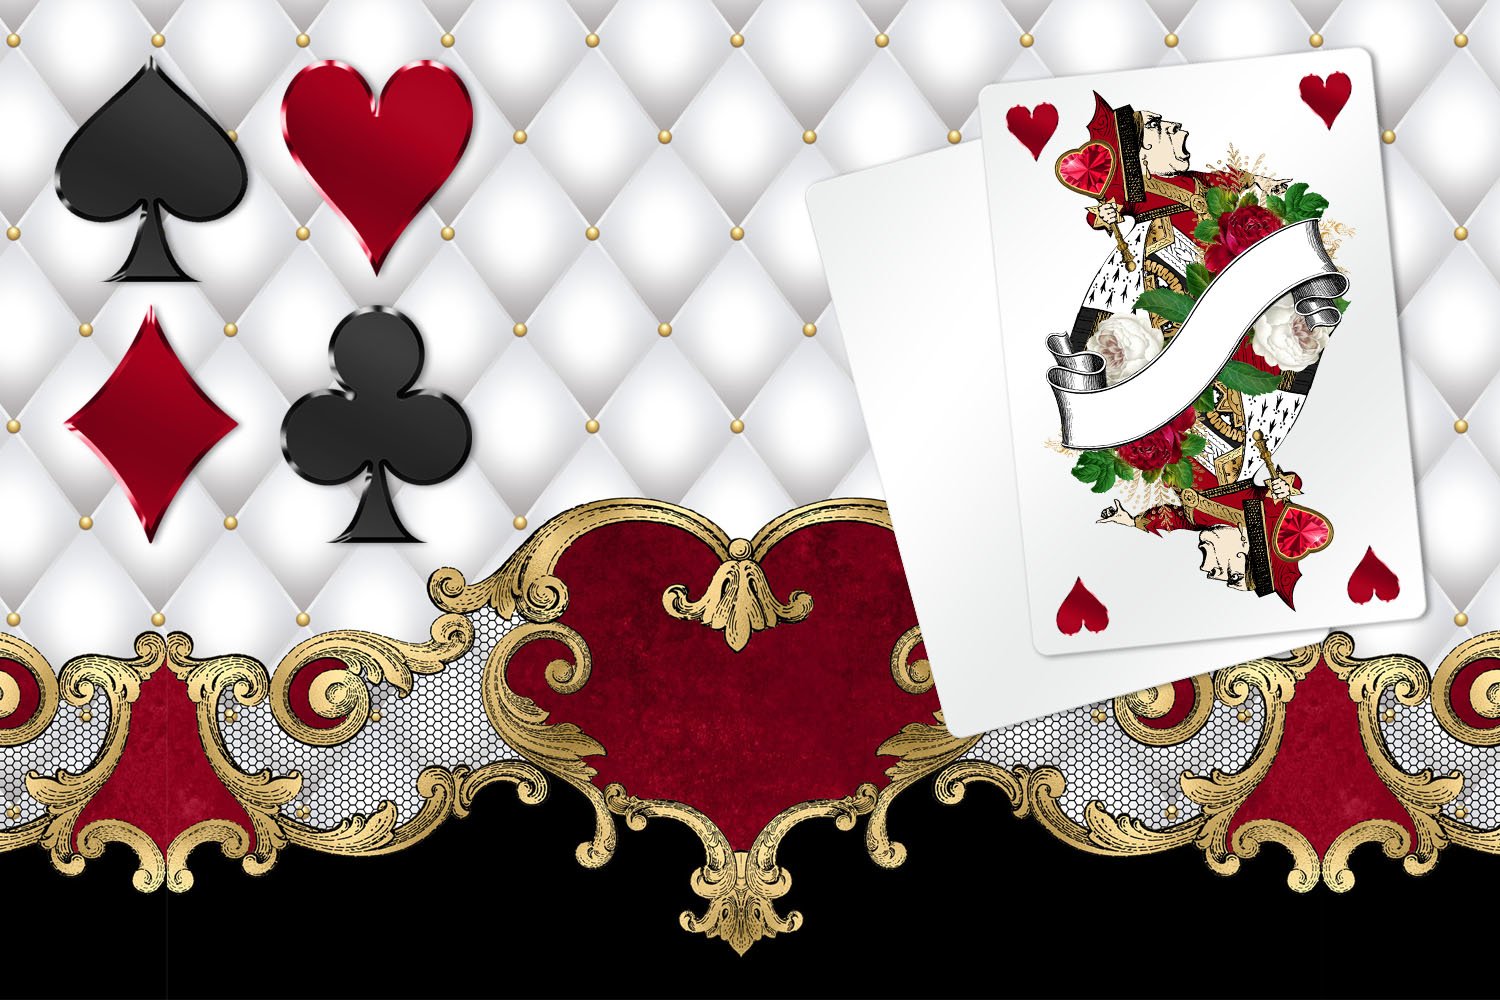 Different suits of cards and textures on the theme of the cartoon.